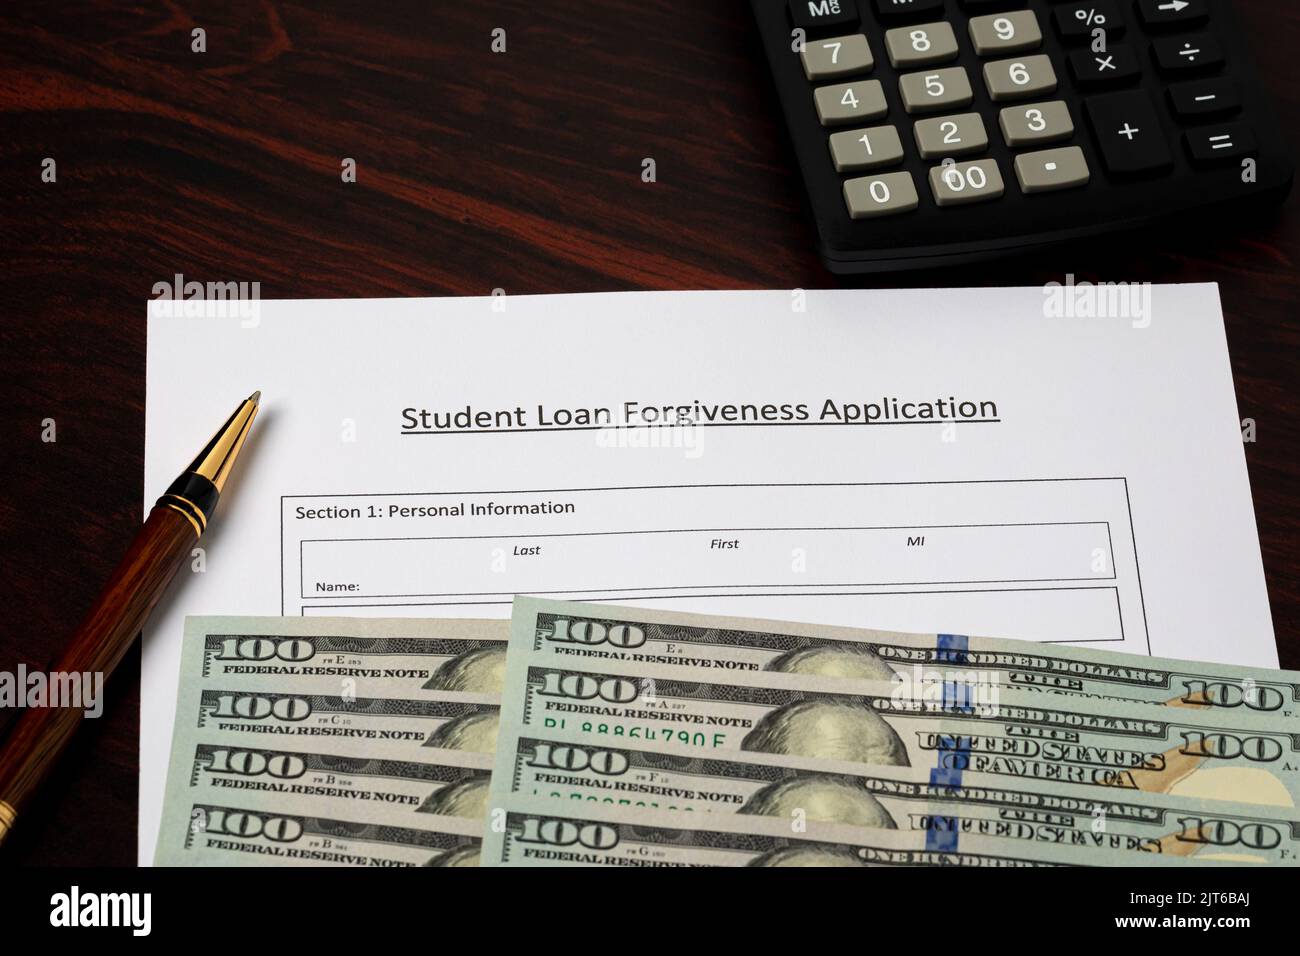 Student loan forgiveness application with cash money. Student debt crisis, tuition assistance and financial aid concept. Stock Photo